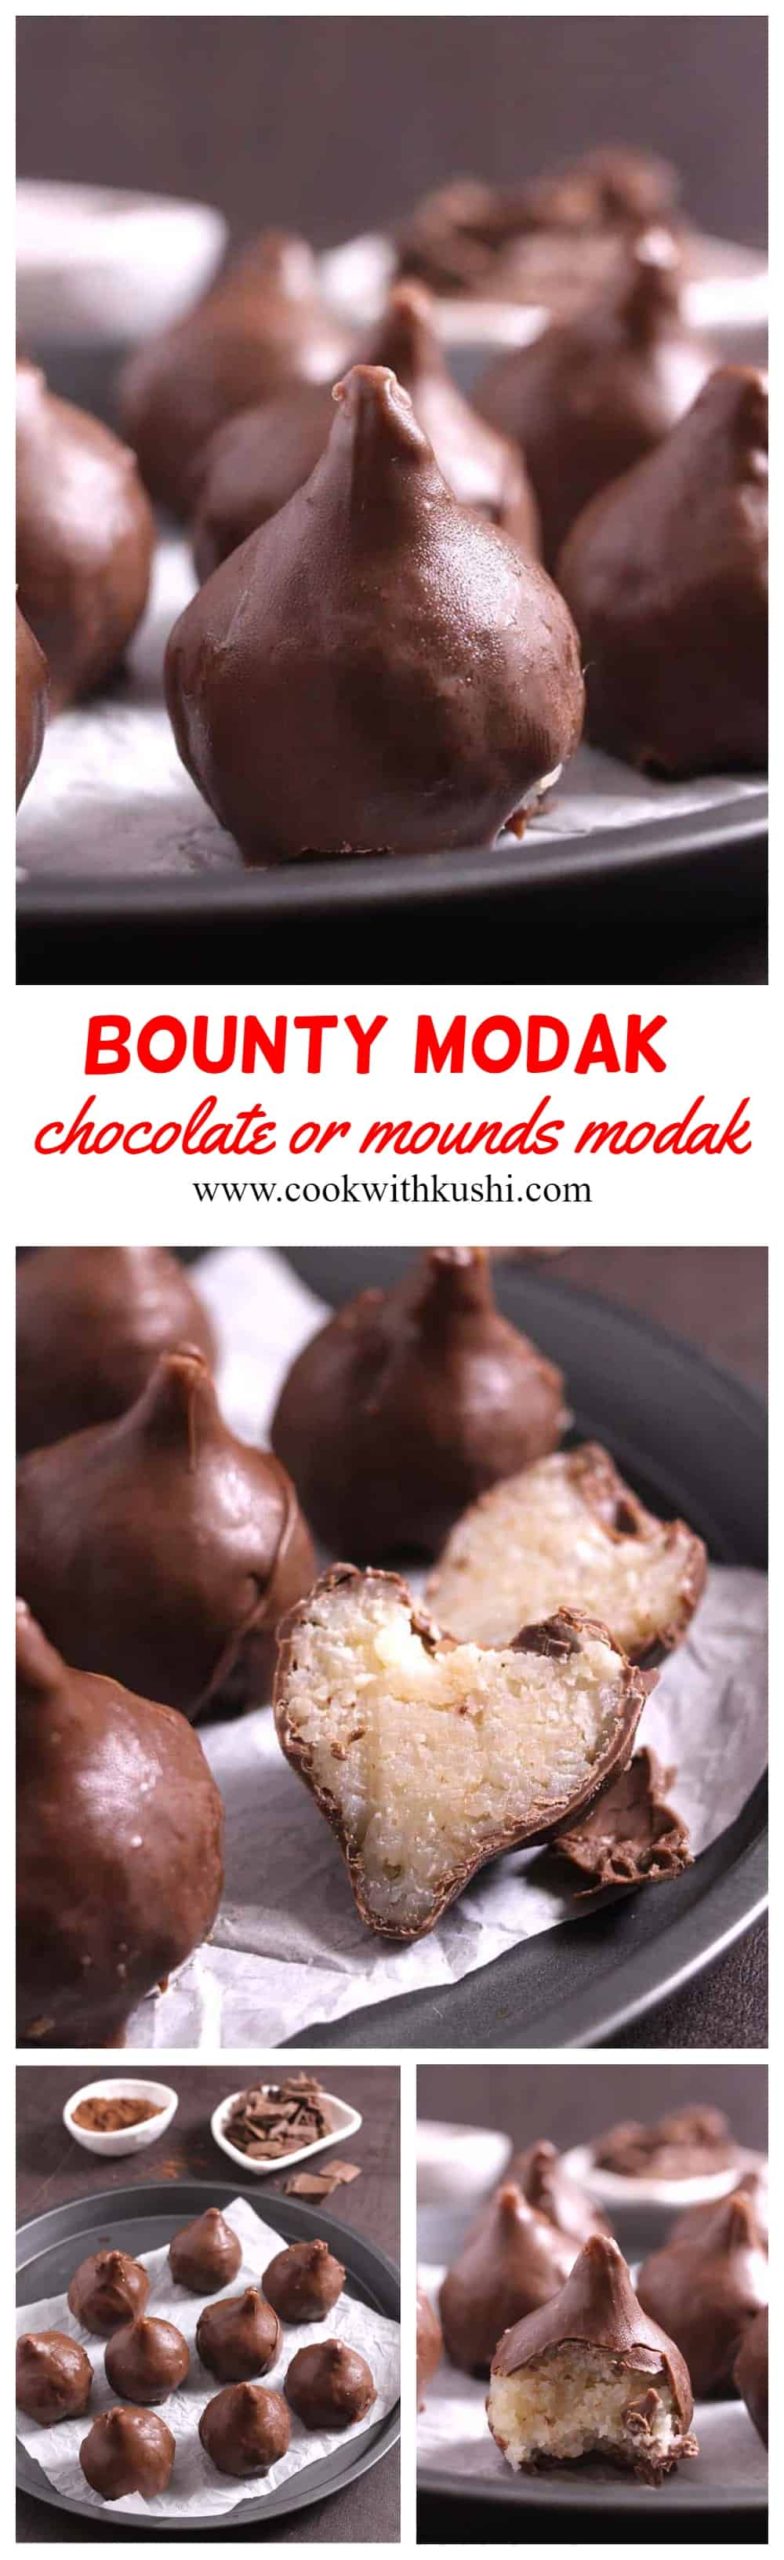 Bounty Modak or Chocolate Modak is a rich and creamy, addictive and melt-in-mouth recipe that you should try for Ganesh Chaturthi this year. #mounds #bounty #coconutbars #chocolate #Homemade #Modak